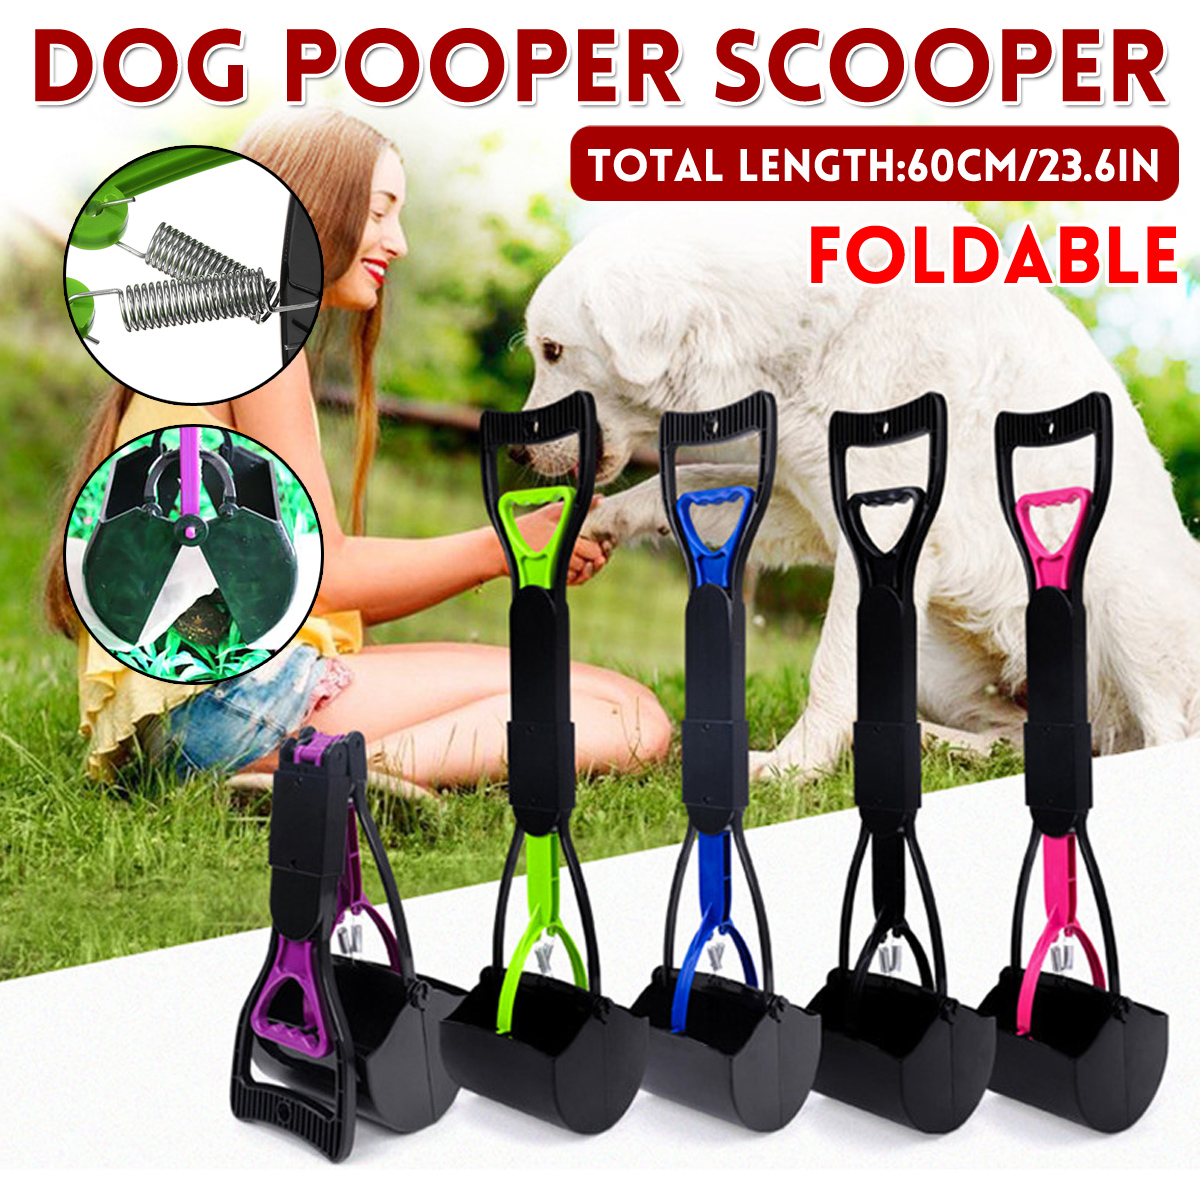 24quot-Large-Pooper-Scooper-Folding-Portable-Pet-aste-Pick-Up-Jaw-Scooper-for-Dogs-Cats-Pets-1881116-1